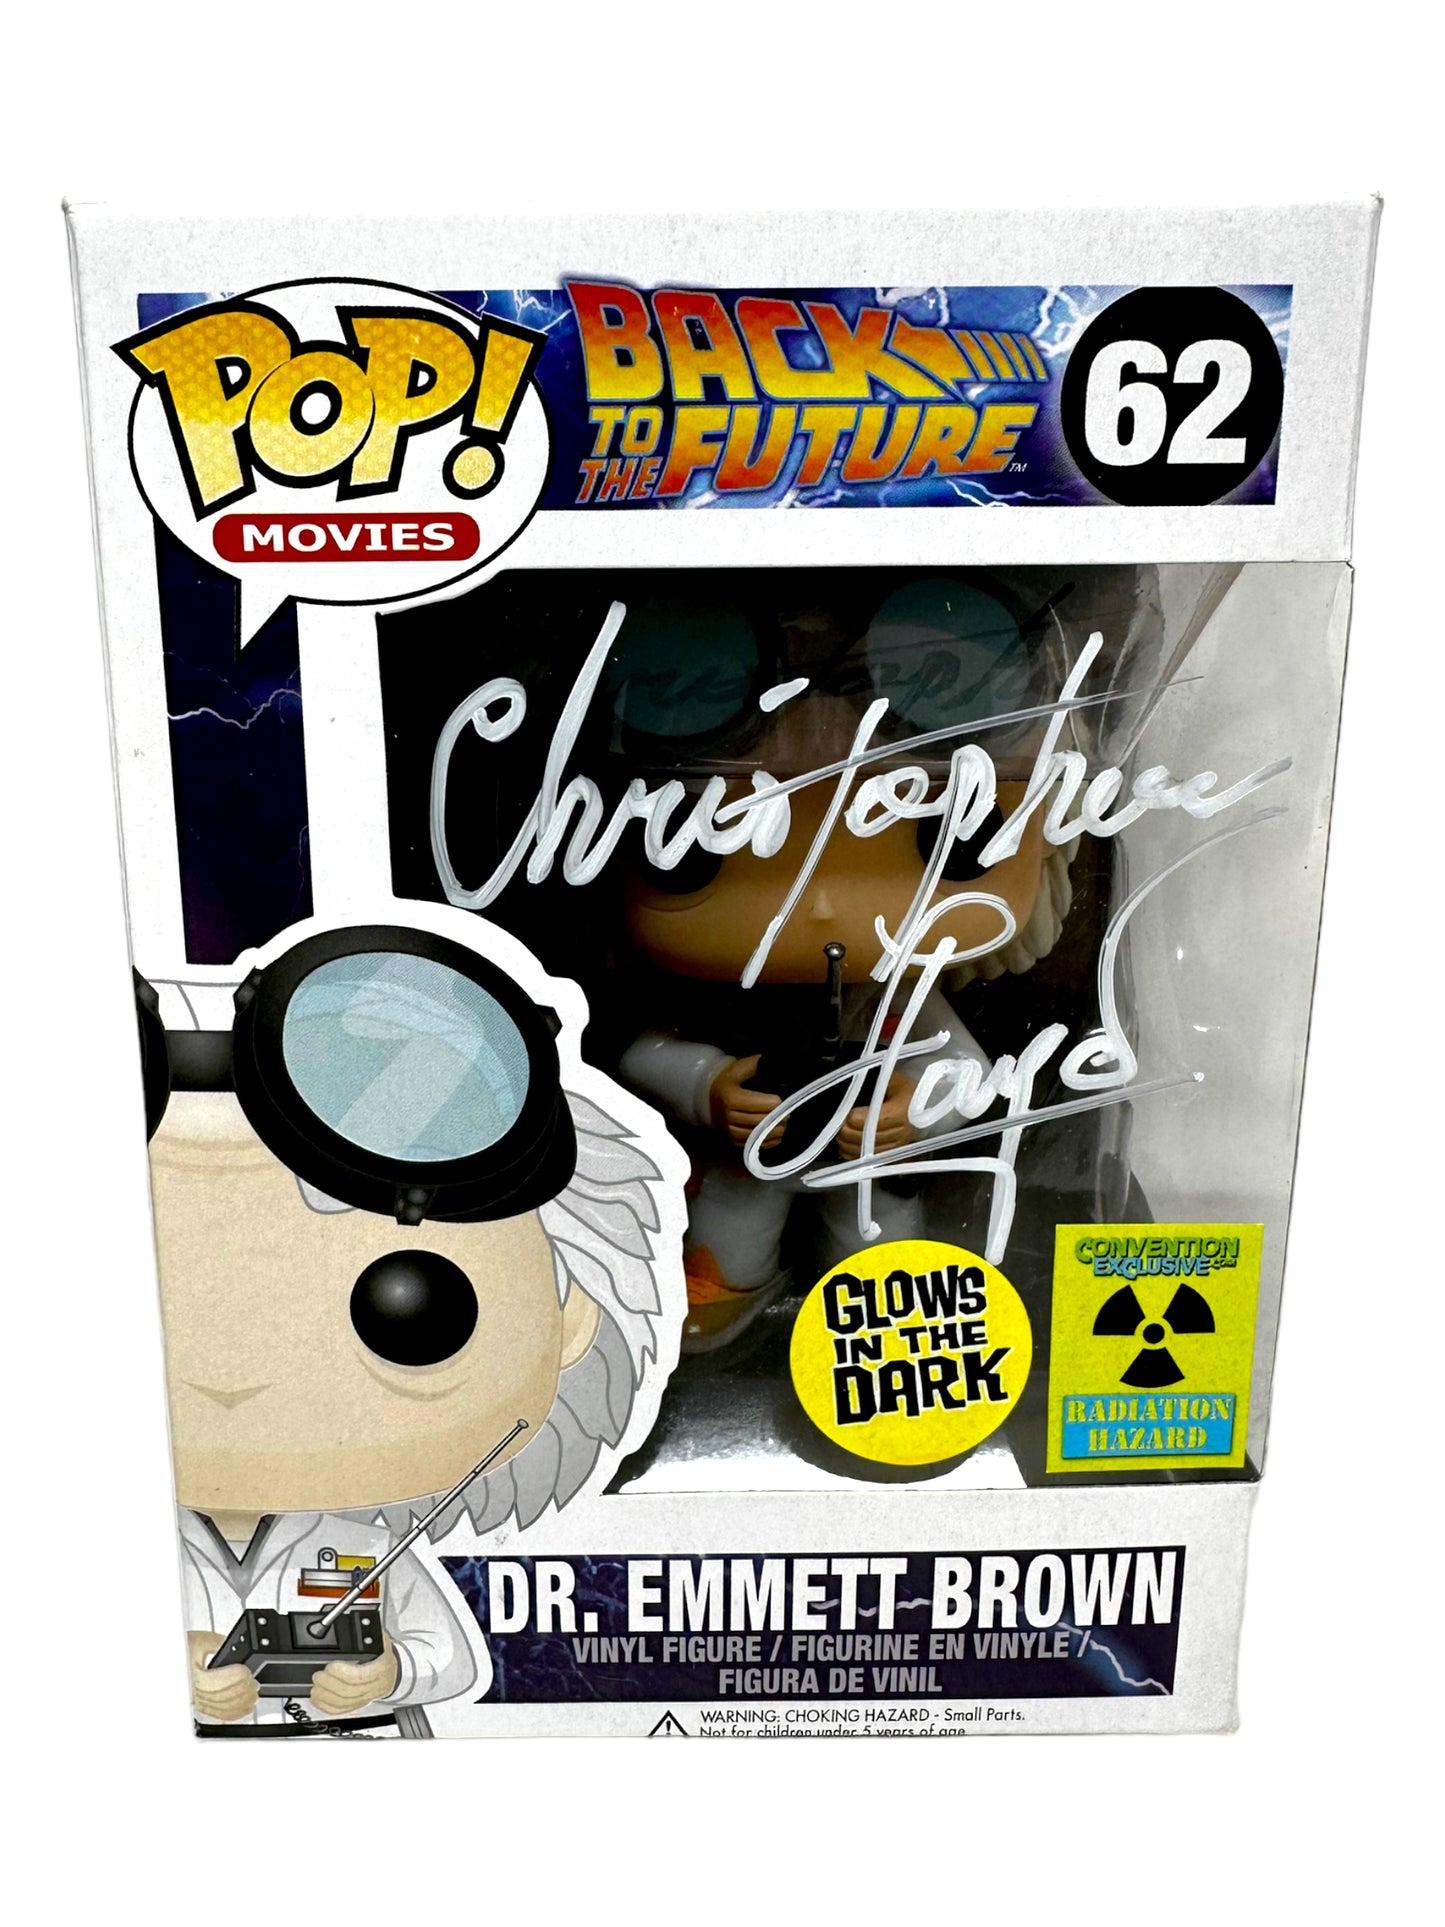 Sold 2014 GITD Con Exclusive Dr. Emmet Brown 62 Autographed JSA COA and #50 replacement box